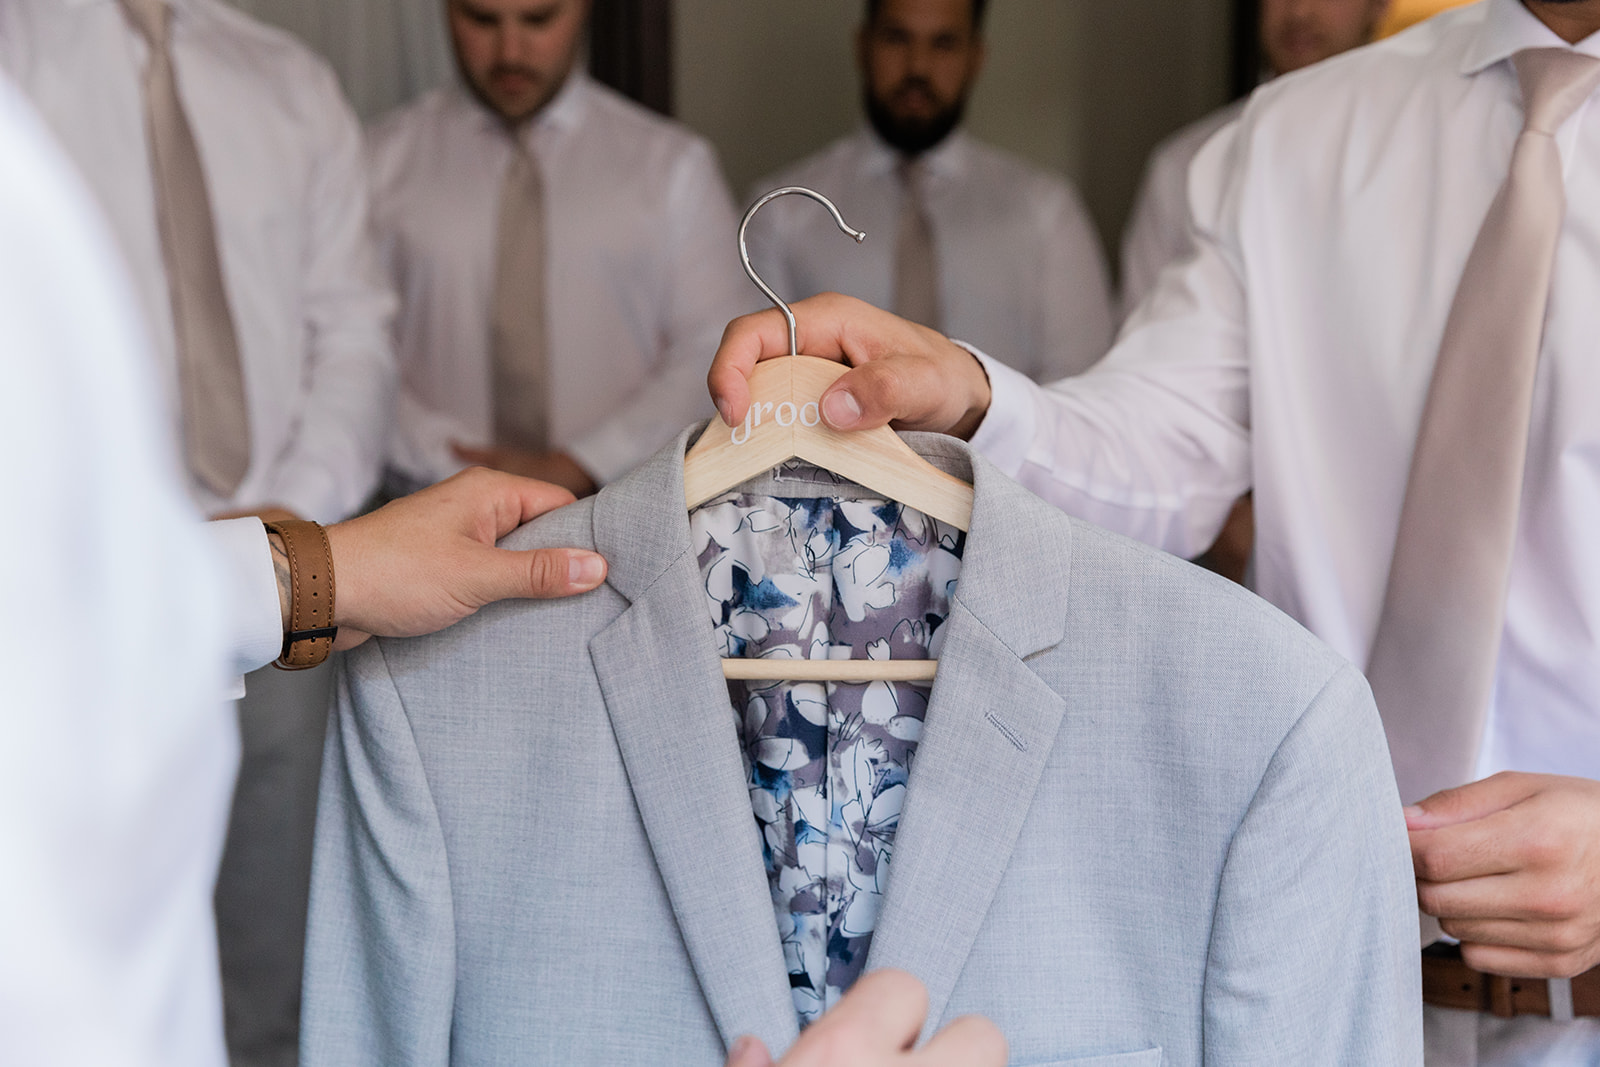 getting the jacket ready to put on the groom